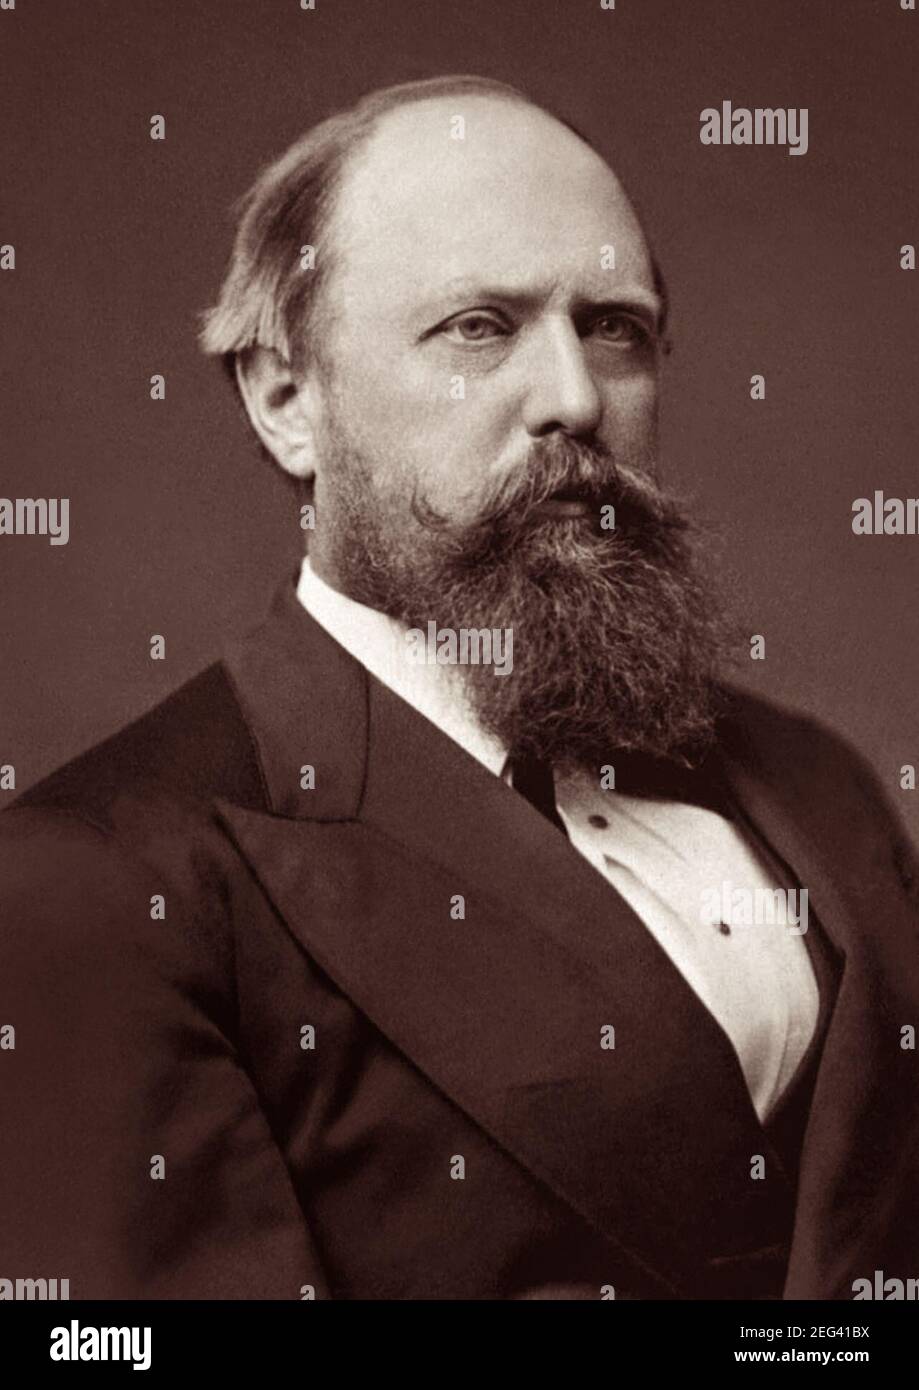 Othniel Charles Marsh (1831-1899), American professor of Paleontology at Yale College and President of the National Academy of Sciences. Marsh, who discovered 80 new species of dinosaurs, competed with fellow paleontologist Edward Drinker Cope from the 1870s to the 1890s in a period of frenzied Western American expeditions known as the "Bone Wars". Stock Photo